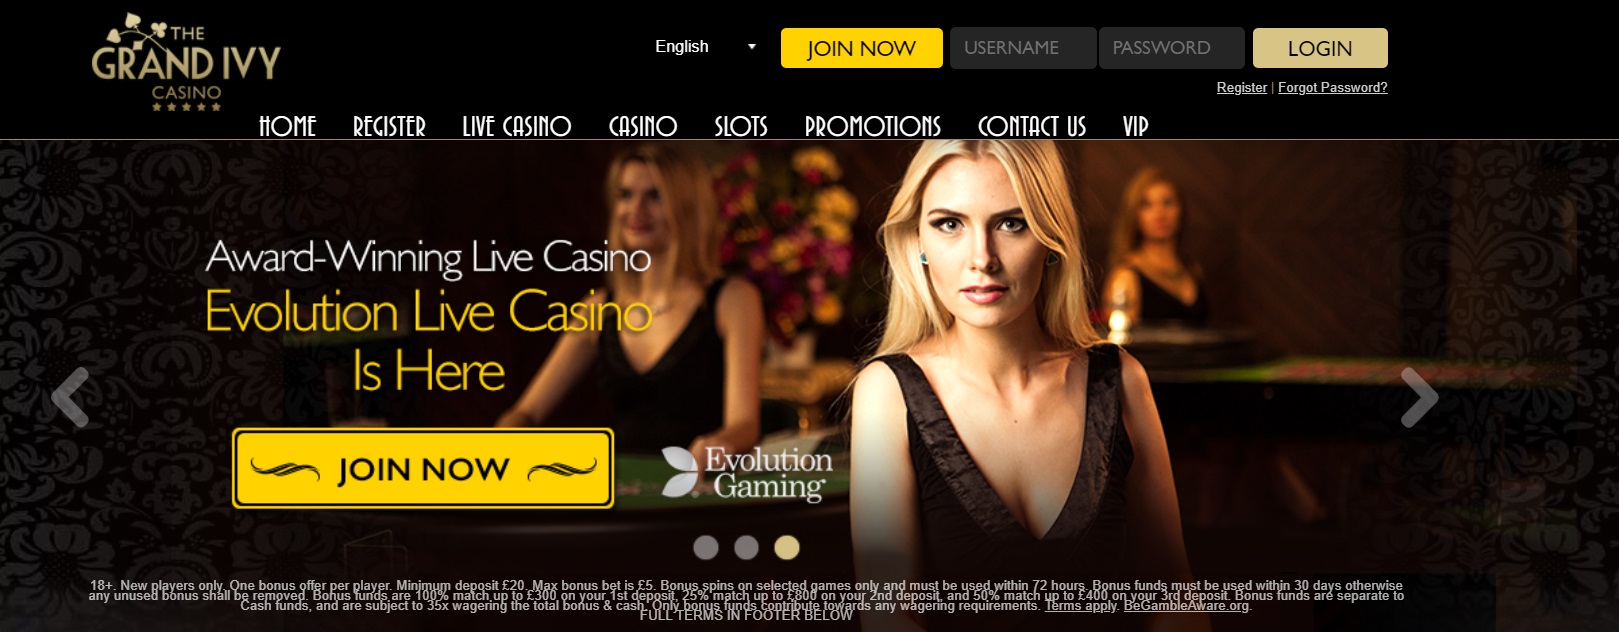 the grand ivy casinogames and slots